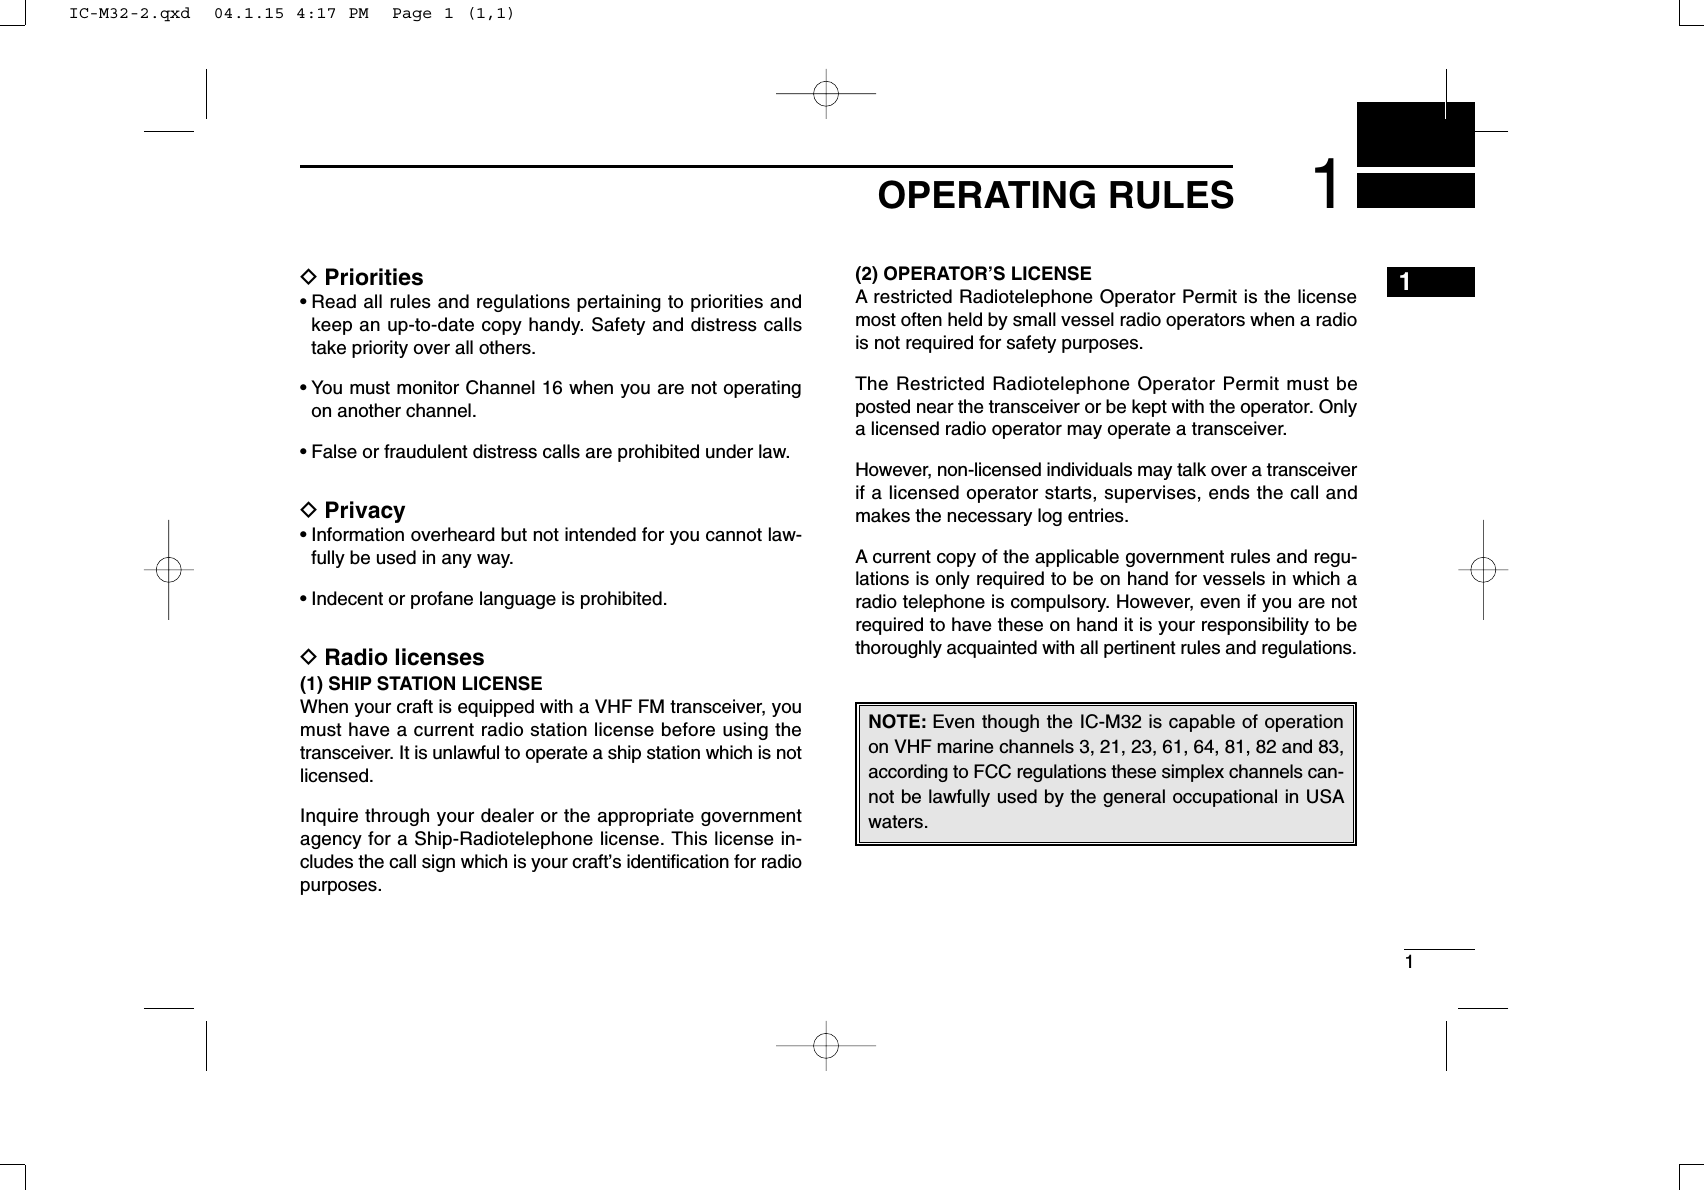 11OPERATING RULES1DPriorities• Read all rules and regulations pertaining to priorities andkeep an up-to-date copy handy. Safety and distress callstake priority over all others.• You must monitor Channel 16 when you are not operatingon another channel.• False or fraudulent distress calls are prohibited under law.DPrivacy• Information overheard but not intended for you cannot law-fully be used in any way.• Indecent or profane language is prohibited.DRadio licenses(1) SHIP STATION LICENSEWhen your craft is equipped with a VHF FM transceiver, youmust have a current radio station license before using thetransceiver. It is unlawful to operate a ship station which is notlicensed.Inquire through your dealer or the appropriate governmentagency for a Ship-Radiotelephone license. This license in-cludes the call sign which is your craft’s identiﬁcation for radiopurposes.(2) OPERATOR’S LICENSEA restricted Radiotelephone Operator Permit is the licensemost often held by small vessel radio operators when a radiois not required for safety purposes.The Restricted Radiotelephone Operator Permit must beposted near the transceiver or be kept with the operator. Onlya licensed radio operator may operate a transceiver.However, non-licensed individuals may talk over a transceiverif a licensed operator starts, supervises, ends the call andmakes the necessary log entries.A current copy of the applicable government rules and regu-lations is only required to be on hand for vessels in which aradio telephone is compulsory. However, even if you are notrequired to have these on hand it is your responsibility to bethoroughly acquainted with all pertinent rules and regulations.NOTE: Even though the IC-M32 is capable of operationon VHF marine channels 3, 21, 23, 61, 64, 81, 82 and 83,according to FCC regulations these simplex channels can-not be lawfully used by the general occupational in USAwaters.IC-M32-2.qxd  04.1.15 4:17 PM  Page 1 (1,1)